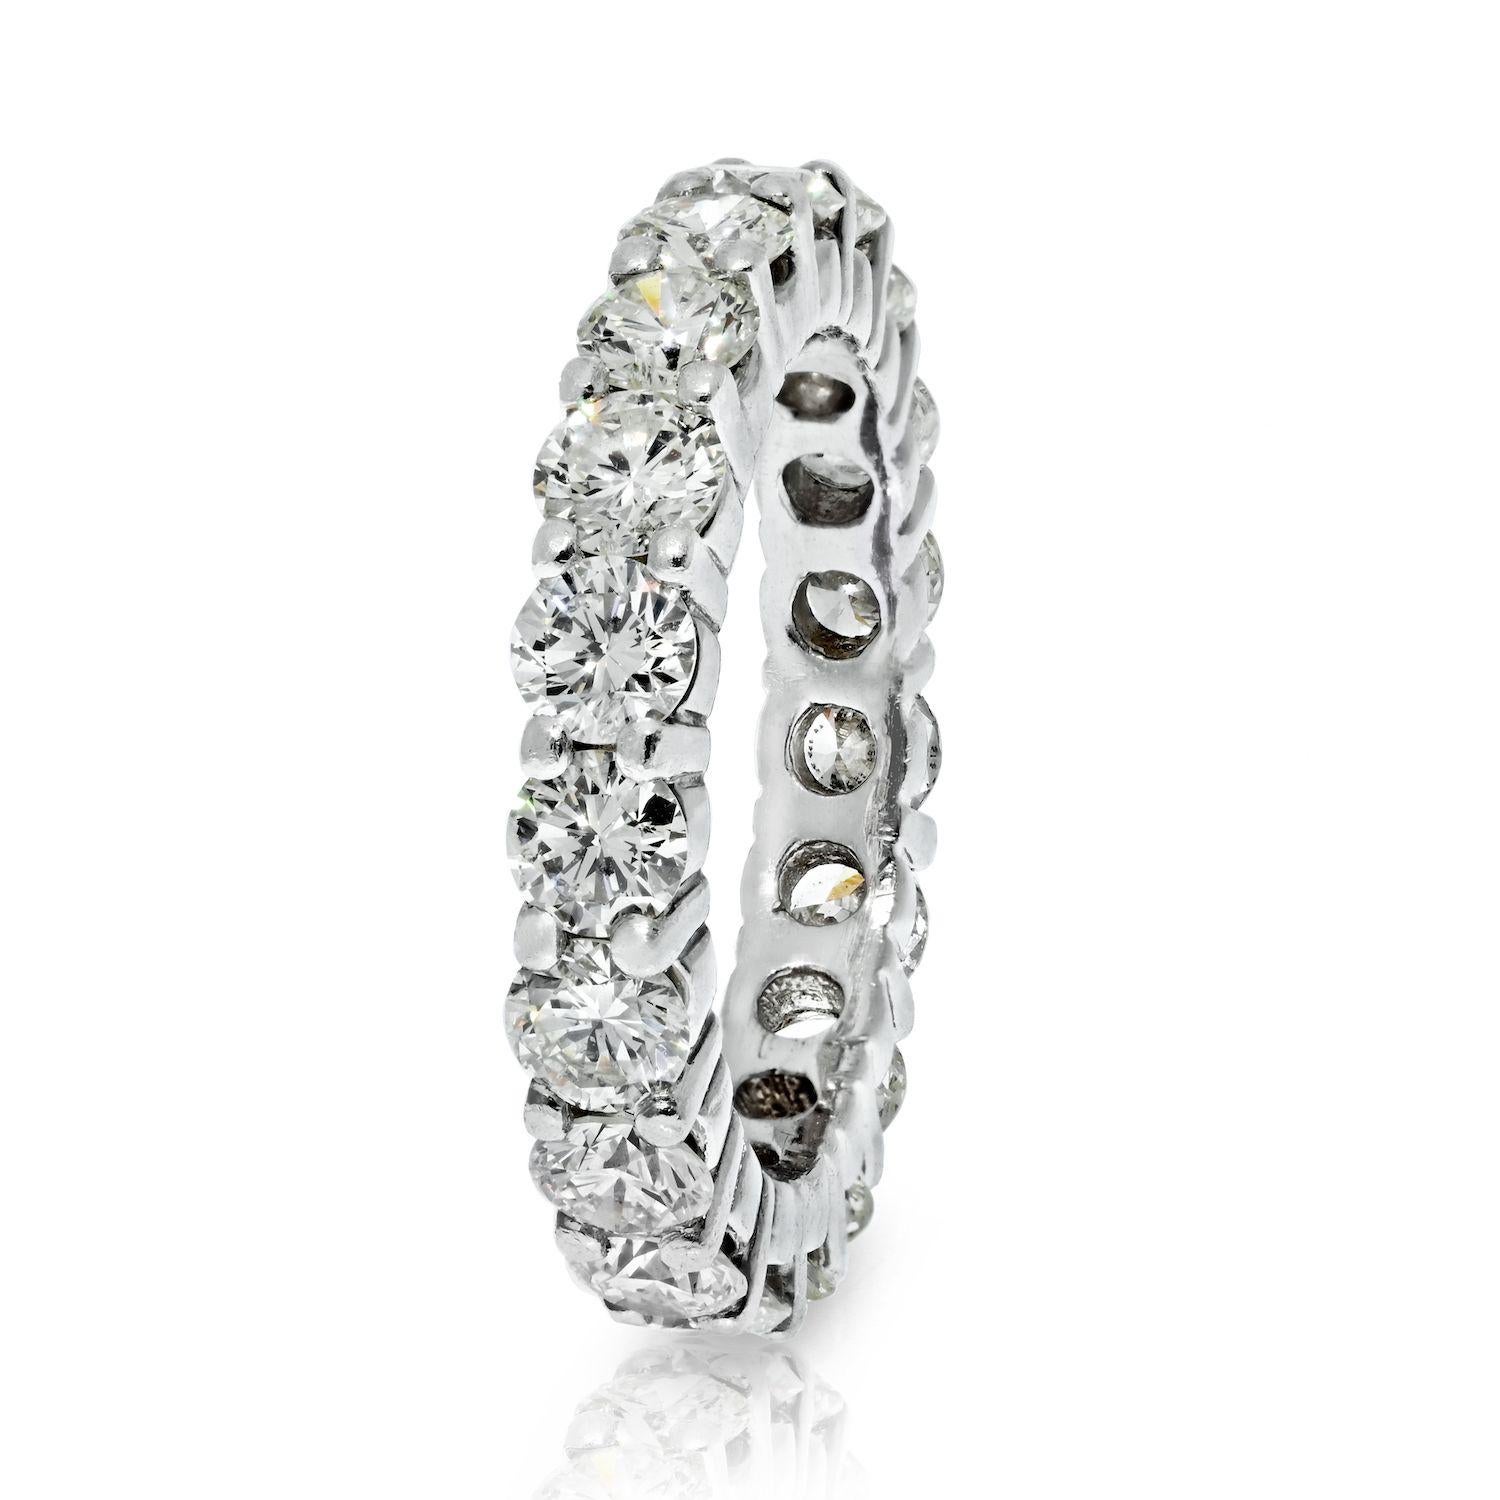 Made in 14k white gold this is a perfect eternity band when all you are after is a classic round eternity ring. Use it as a wedding band, a stackable or as a fun right hand ring, you decide! Made with 3.50 carats of round natural diamonds this ring